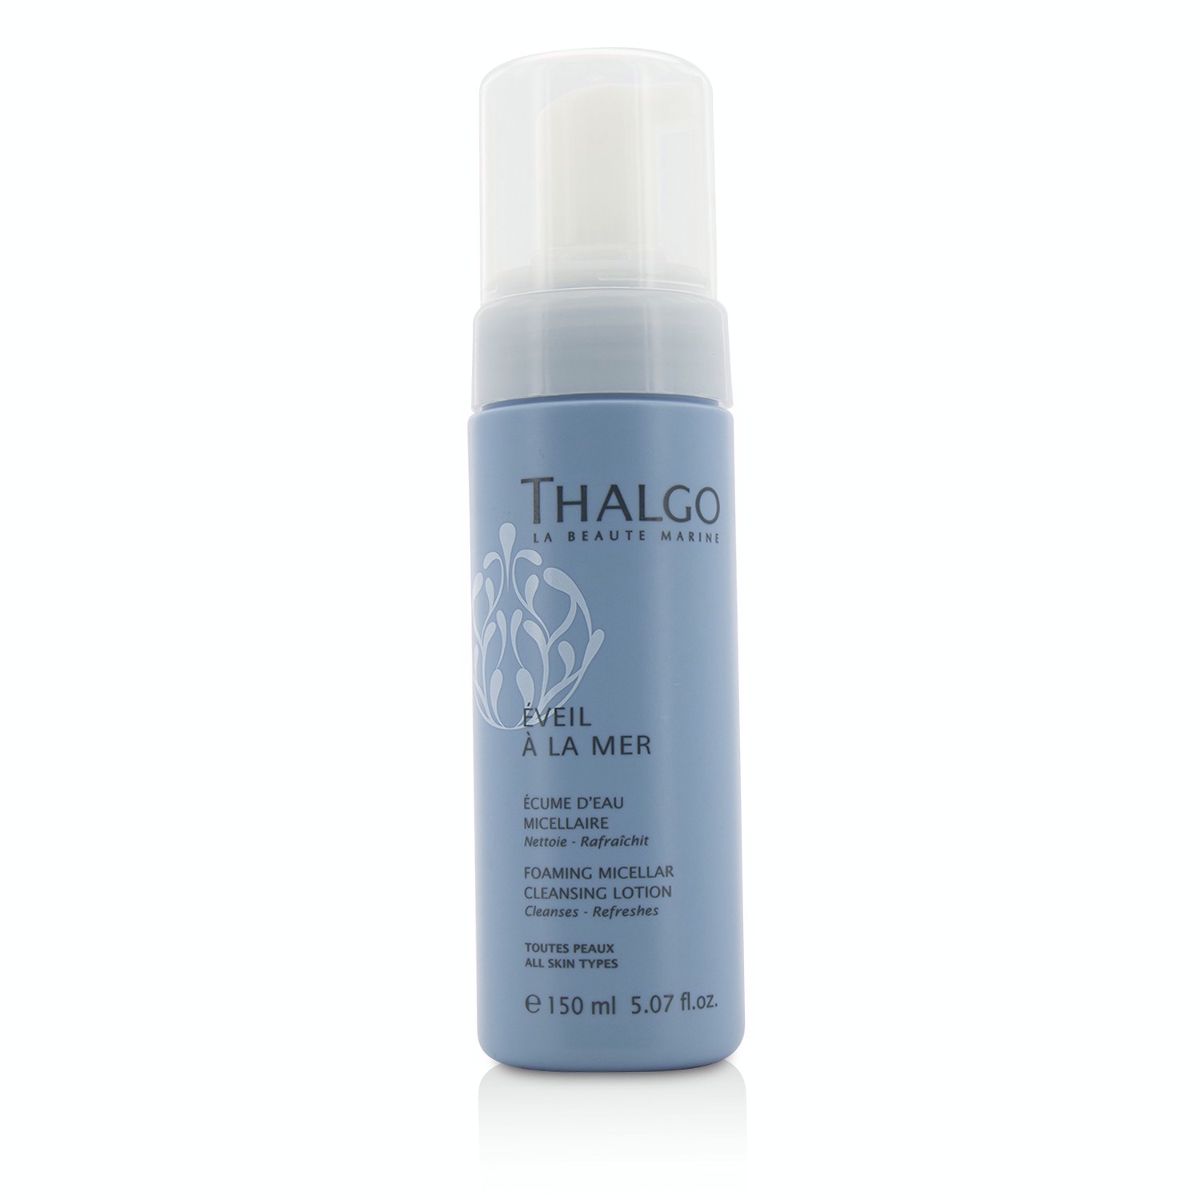 Eveil A La Mer Foaming Micellar Cleansing Lotion - For All Skin Types Thalgo Image